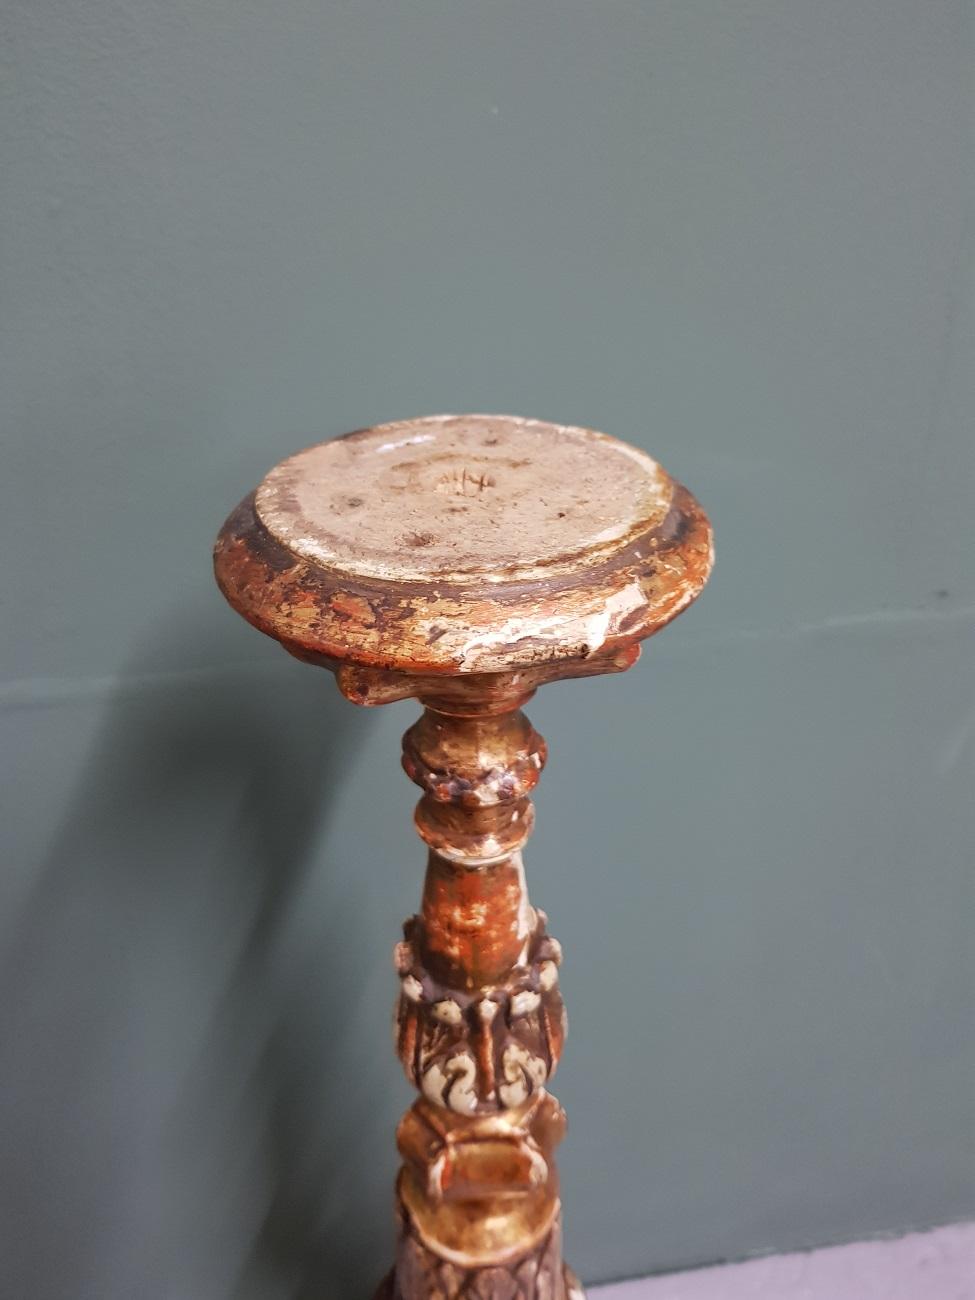 18th century Italian wooden church candlestick with original gilding which has unleashed several places, the candle holder on the top is missing.

The measurements are,
Depth 15 cm/ 5.9 inch.
Width 17.5 cm/ 6.8 inch.
Height 69 cm/ 27.1 inch.